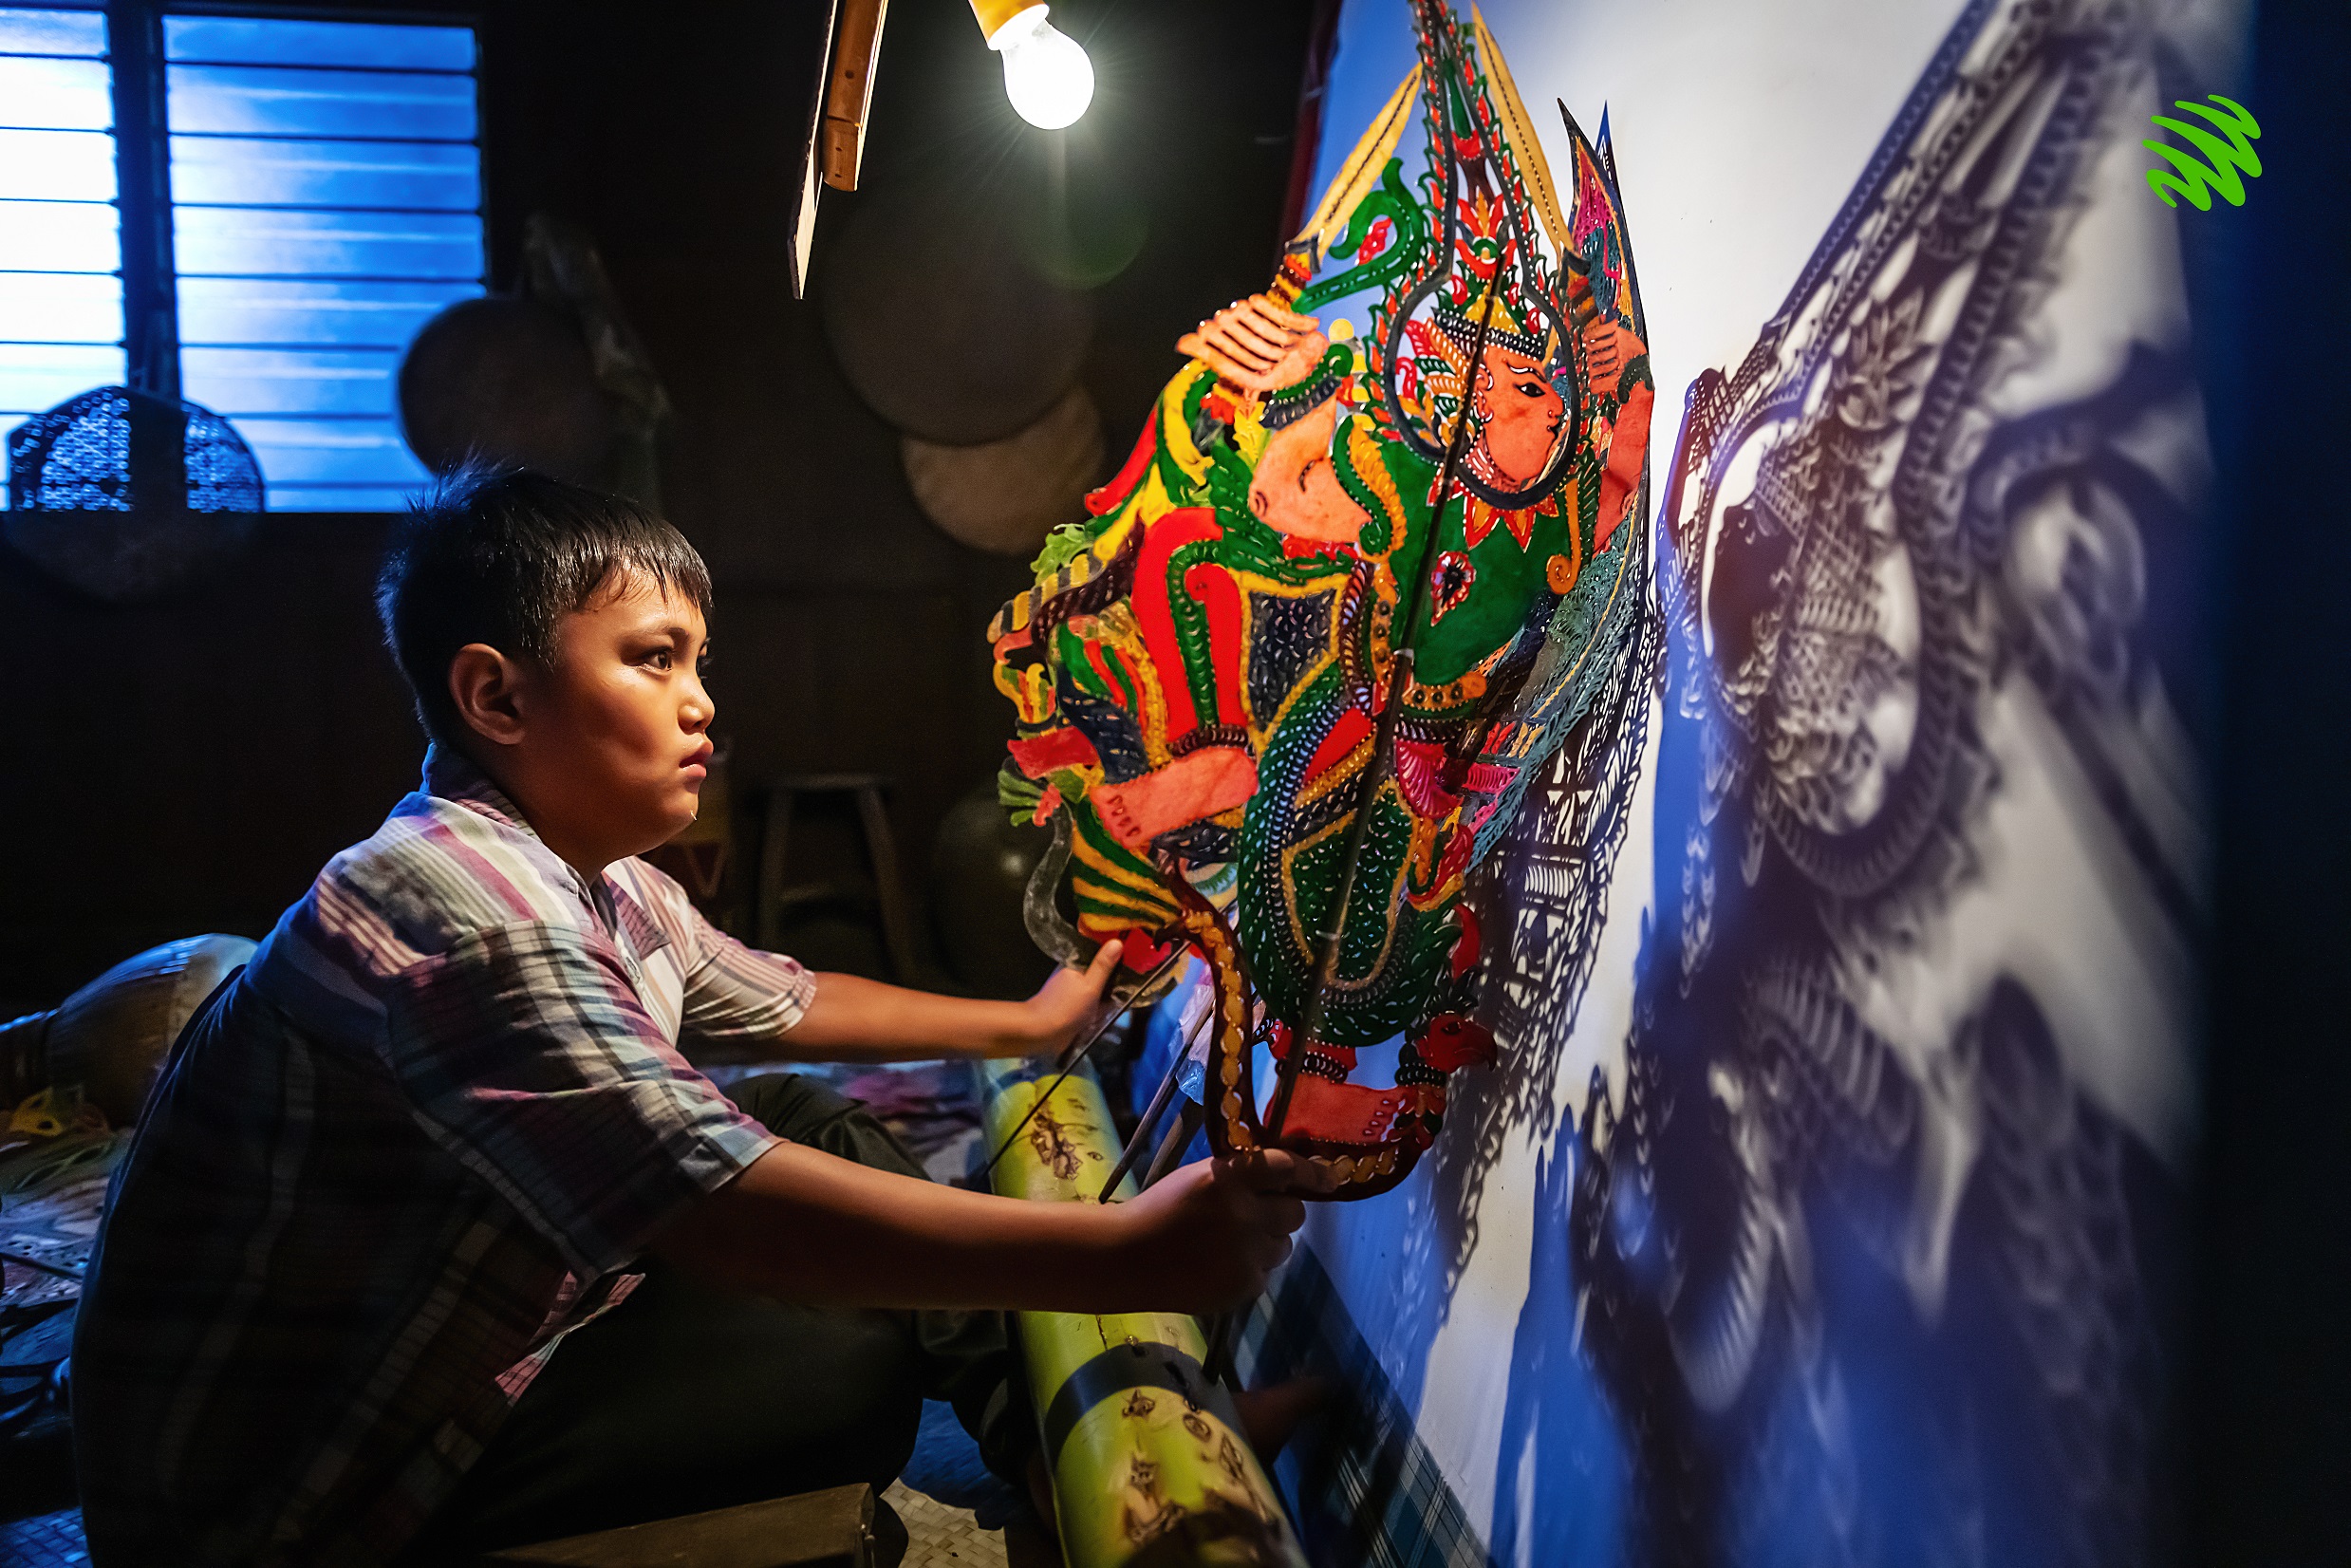 Maxis unveils film capturing traditional art through the power of its network and iPhone 12 Pro